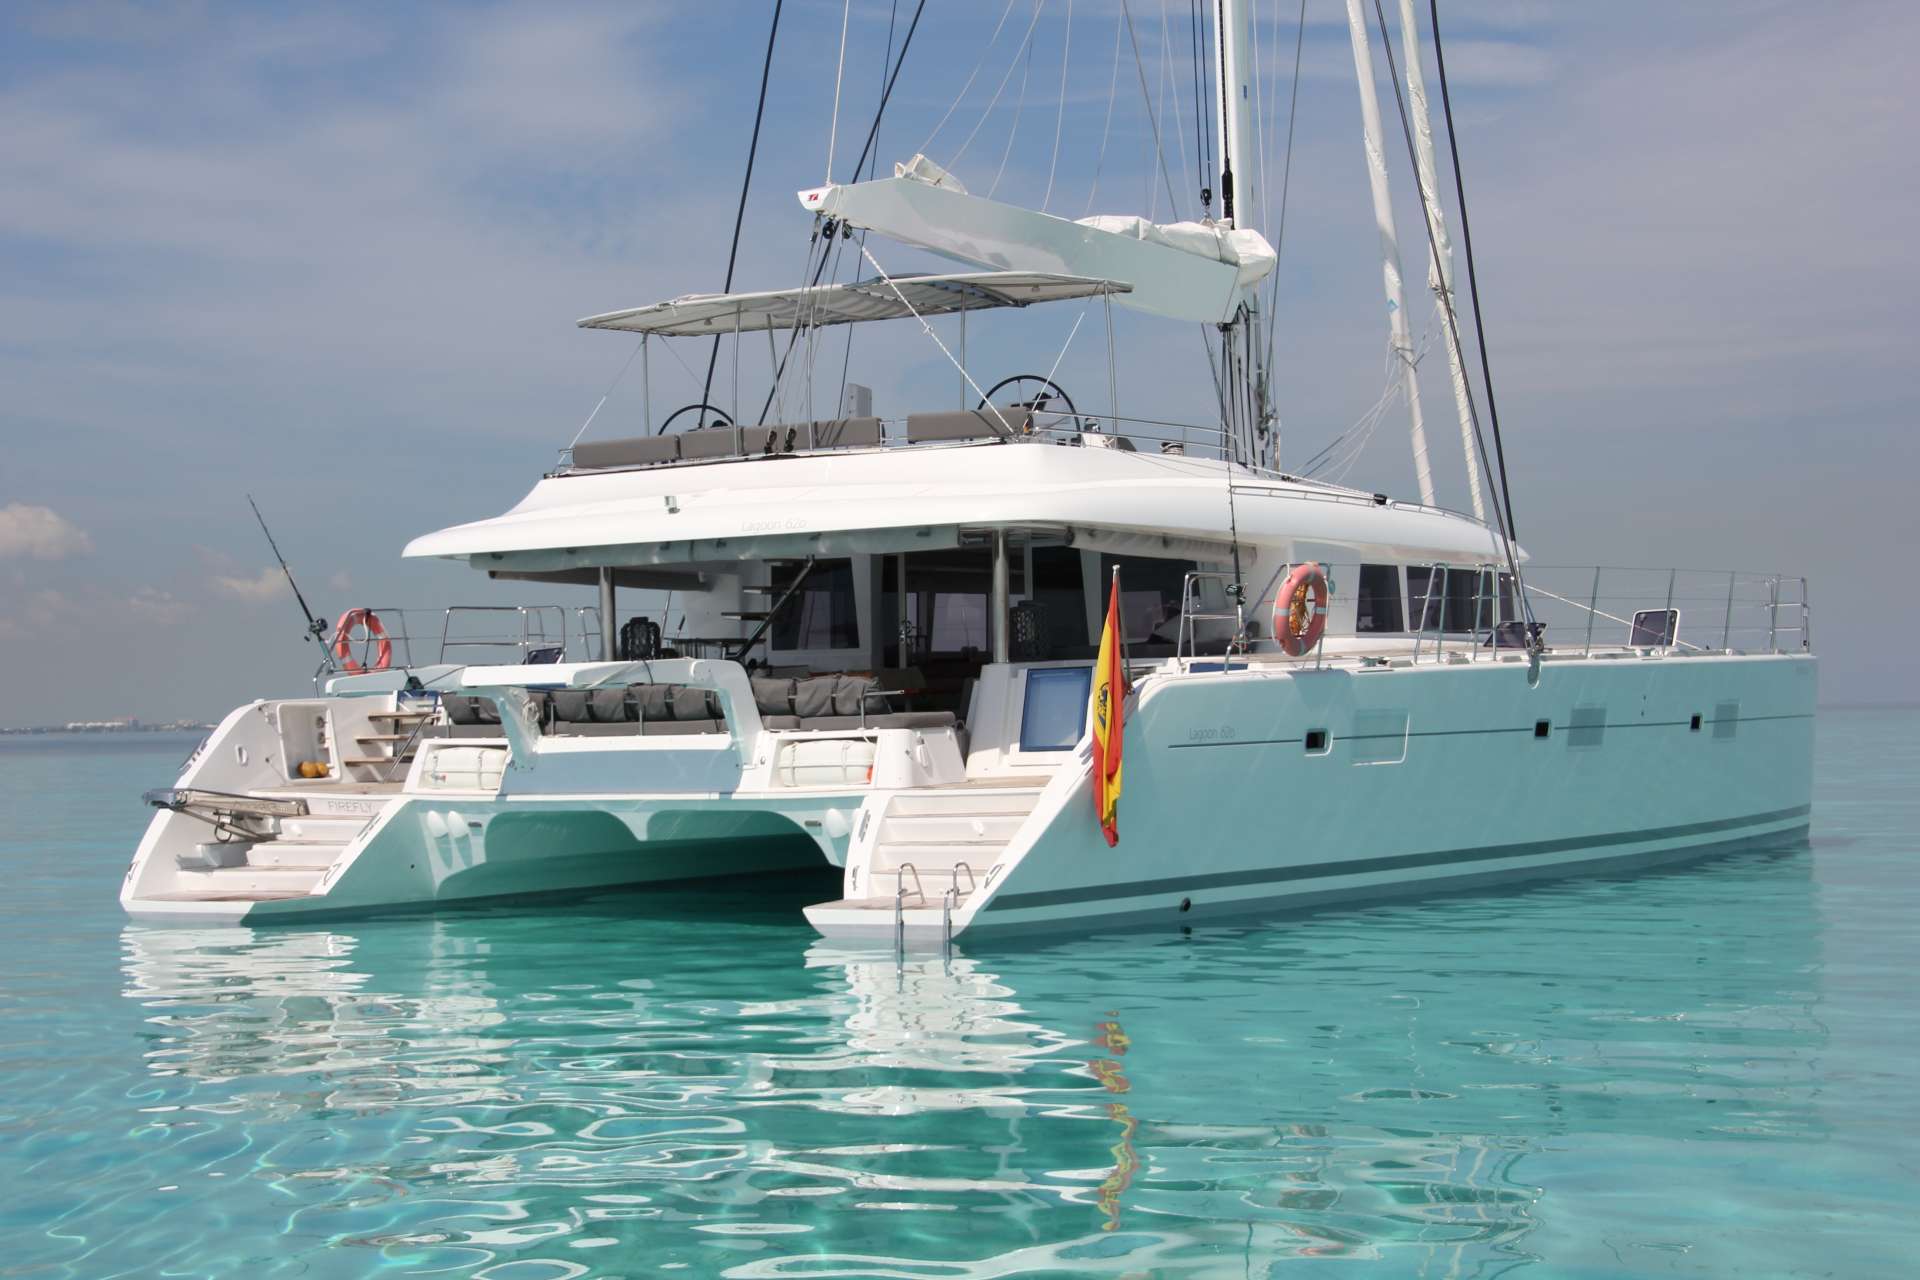 FIREFLY Yacht Charter - At anchorage